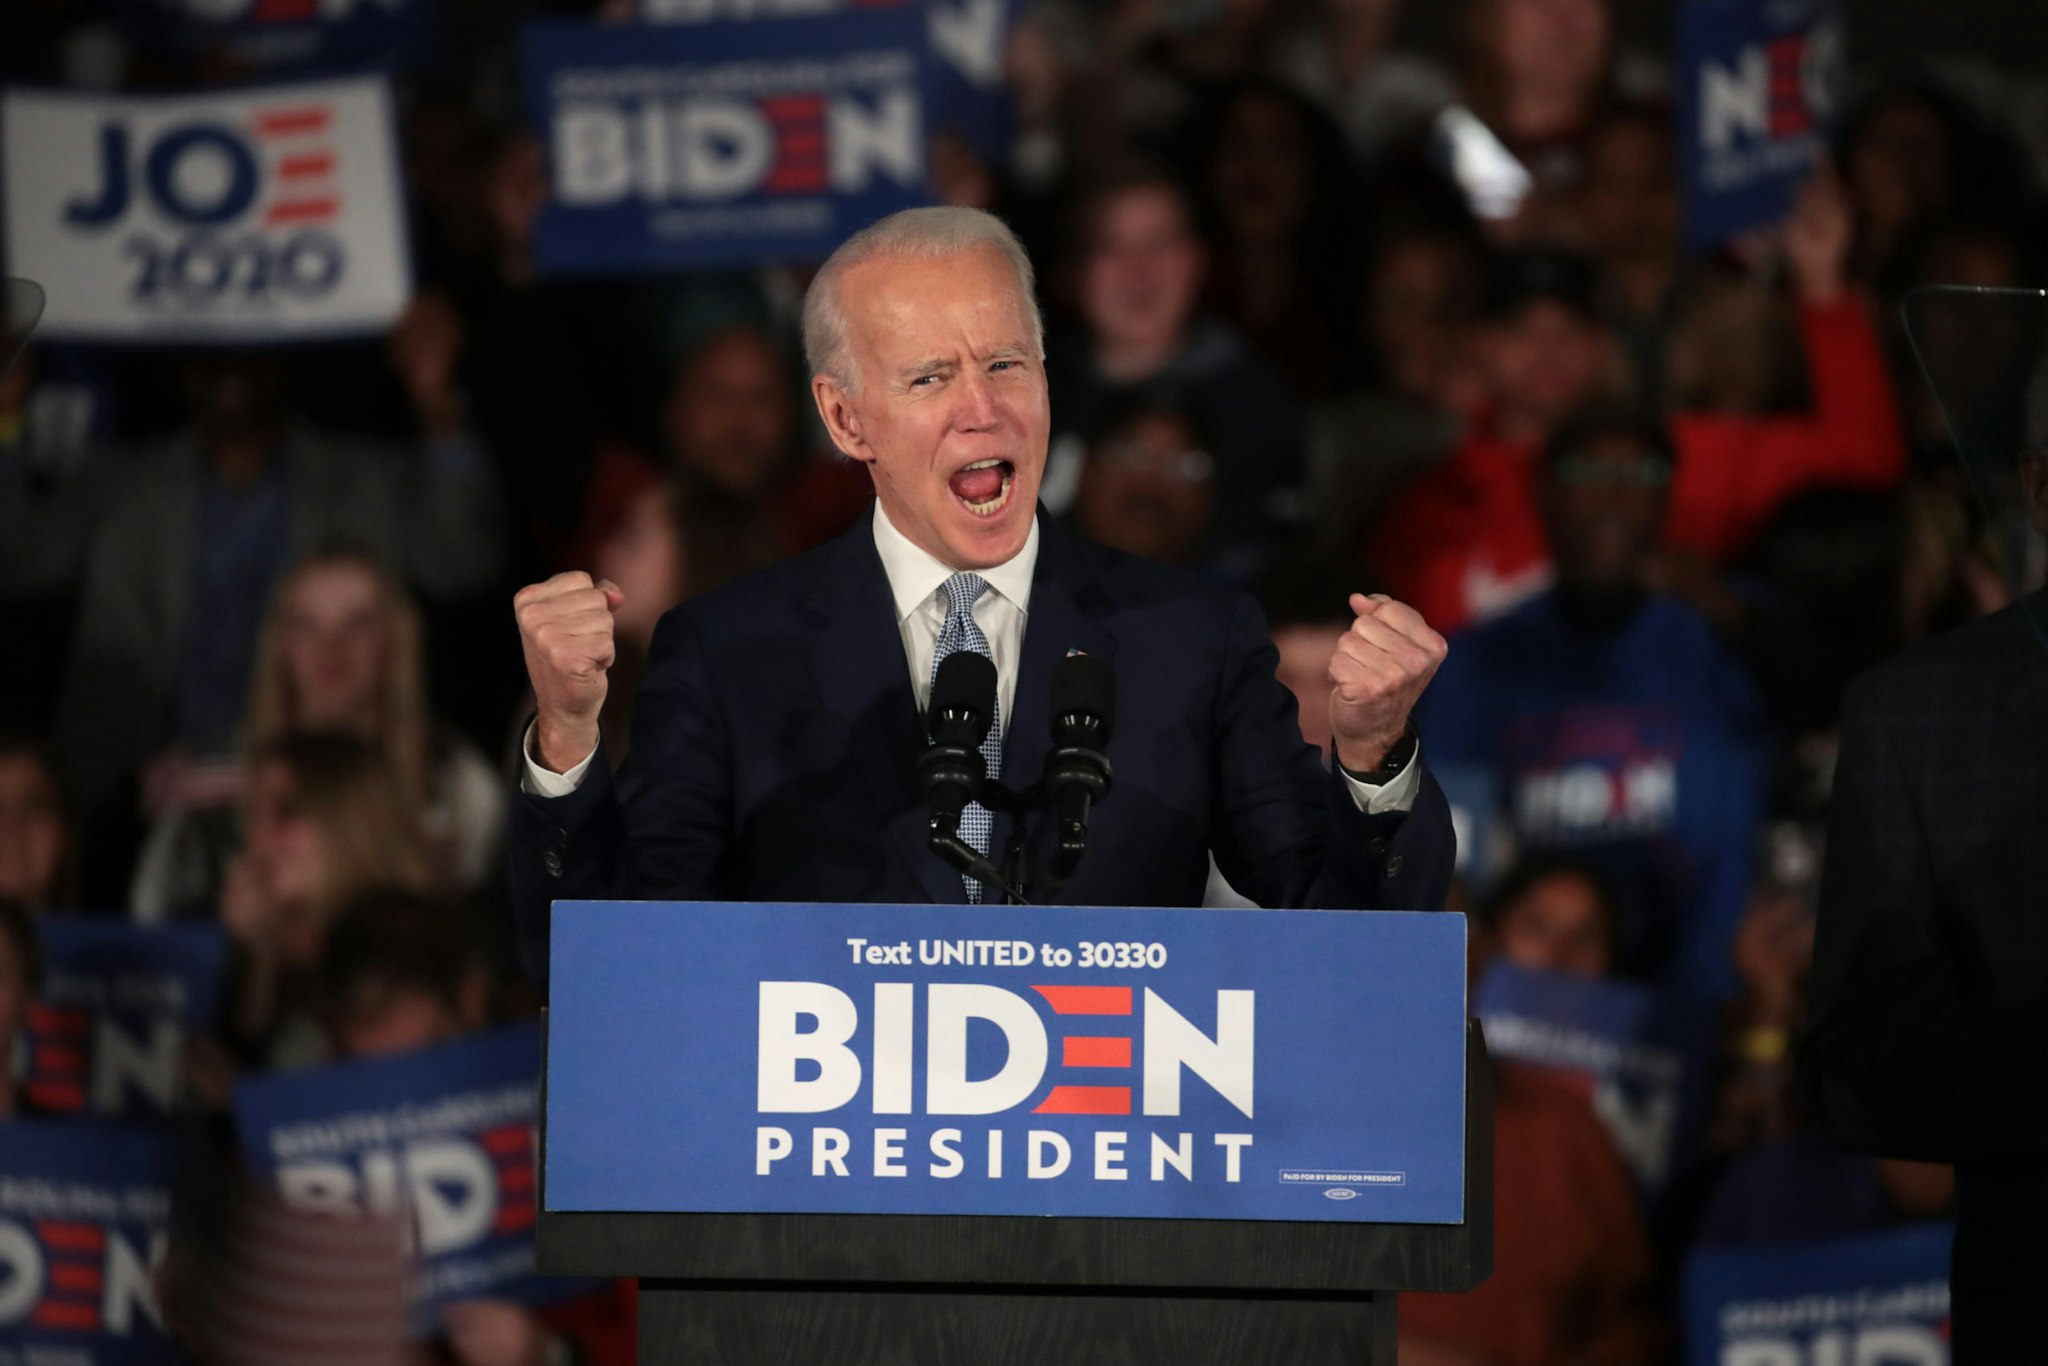 COLUMBIA, SOUTH CAROLINA - FEBRUARY 29: Democratic presidential candidate former Vice President Joe Biden celebrates with his supporters after declaring victory at an election-night rally at the University of South Carolina Volleyball Center on February 29, 2020 in Columbia, South Carolina. The next big contest for the Democratic candidates will be Super Tuesday on March 3, when 14 states and American Samoa go to the polls. (Photo by Scott Olson/Getty Images)